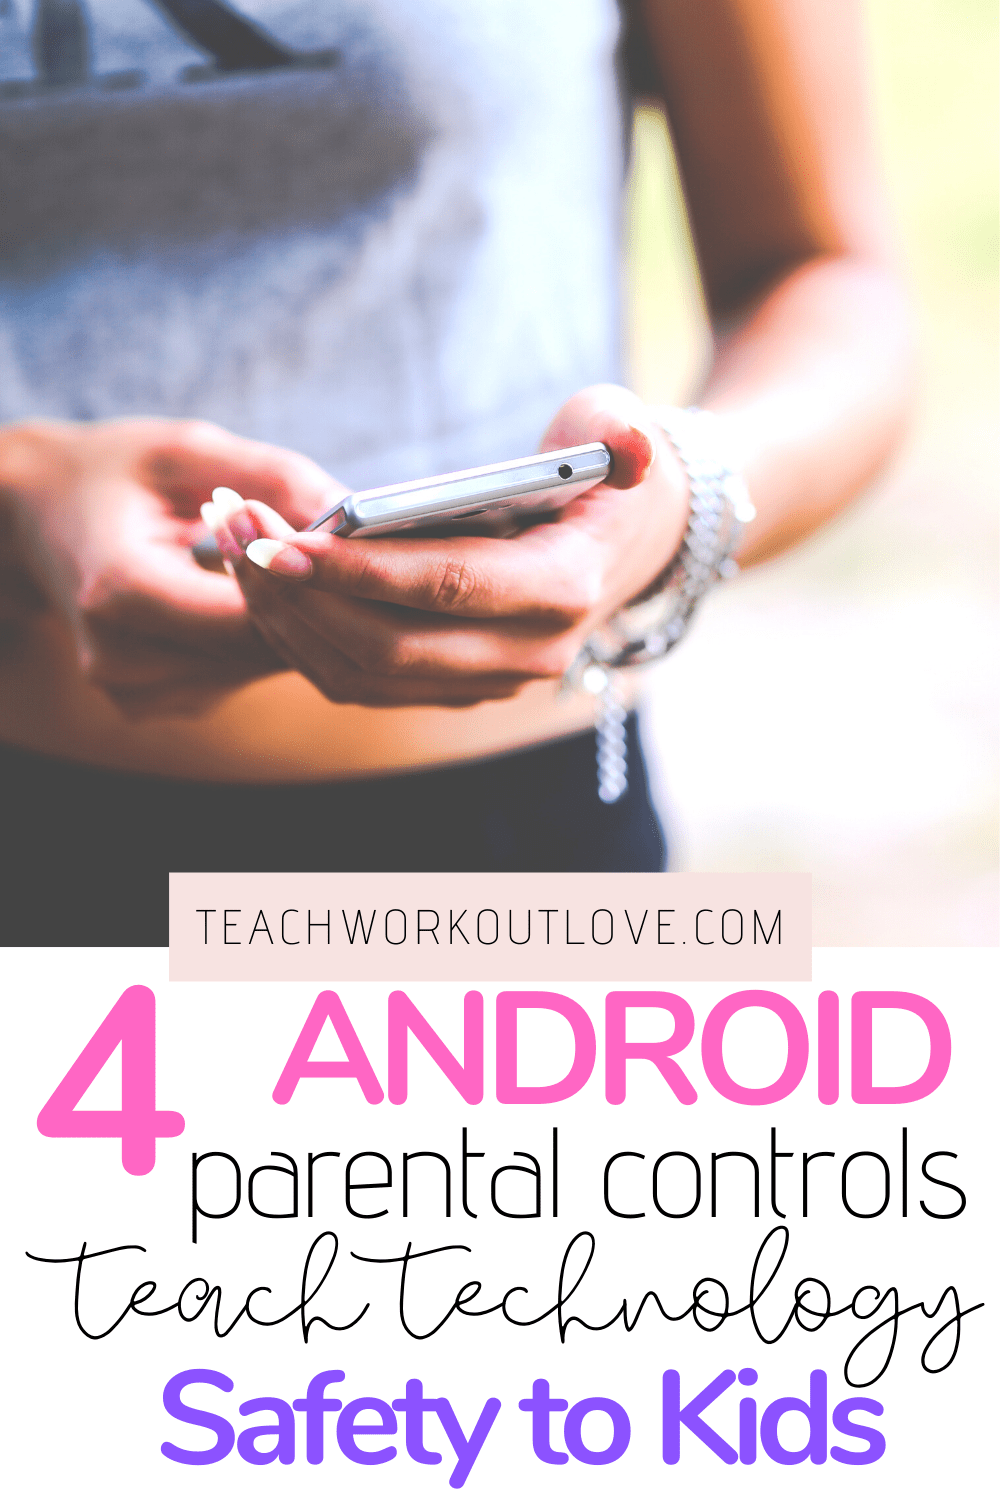 Parents can use Android parental controls offered by specialized digital apps such as FamilyTime android parental control app.